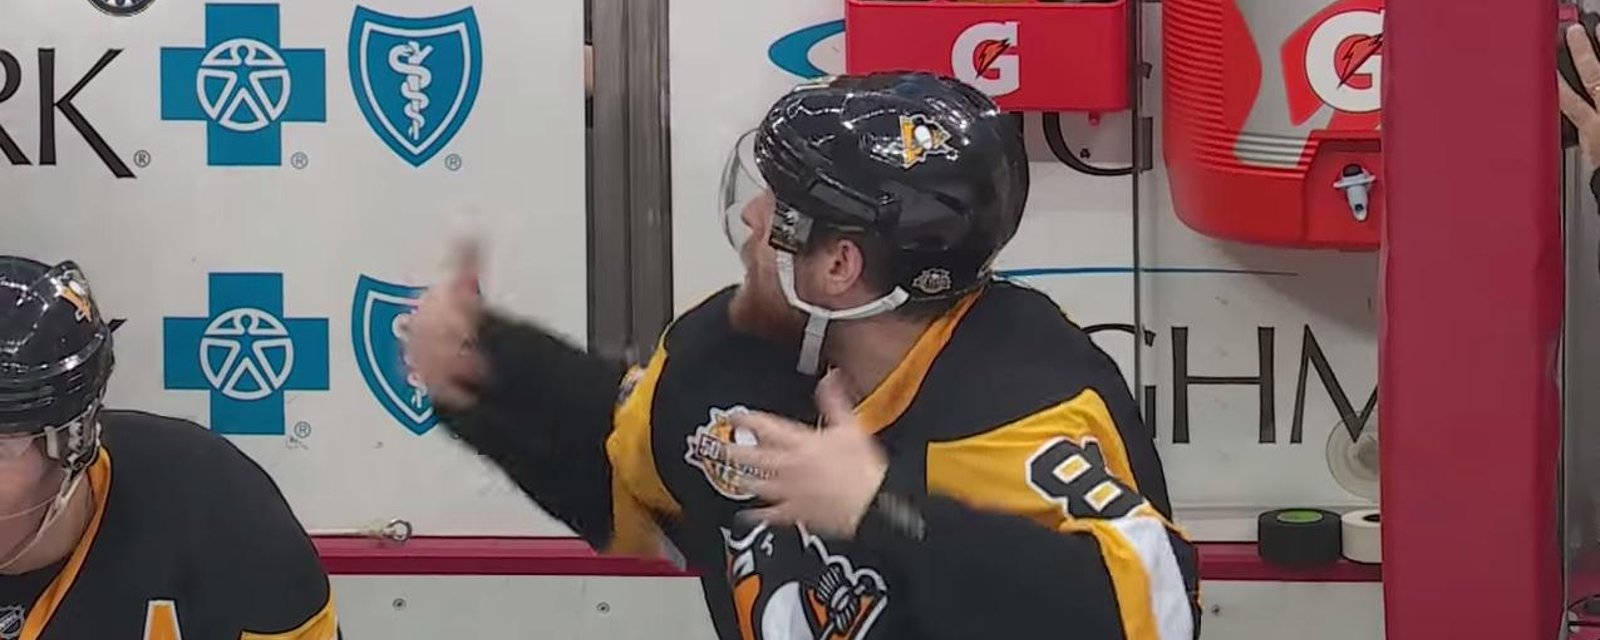 Phil Kessel ANGRY after losing blade. 